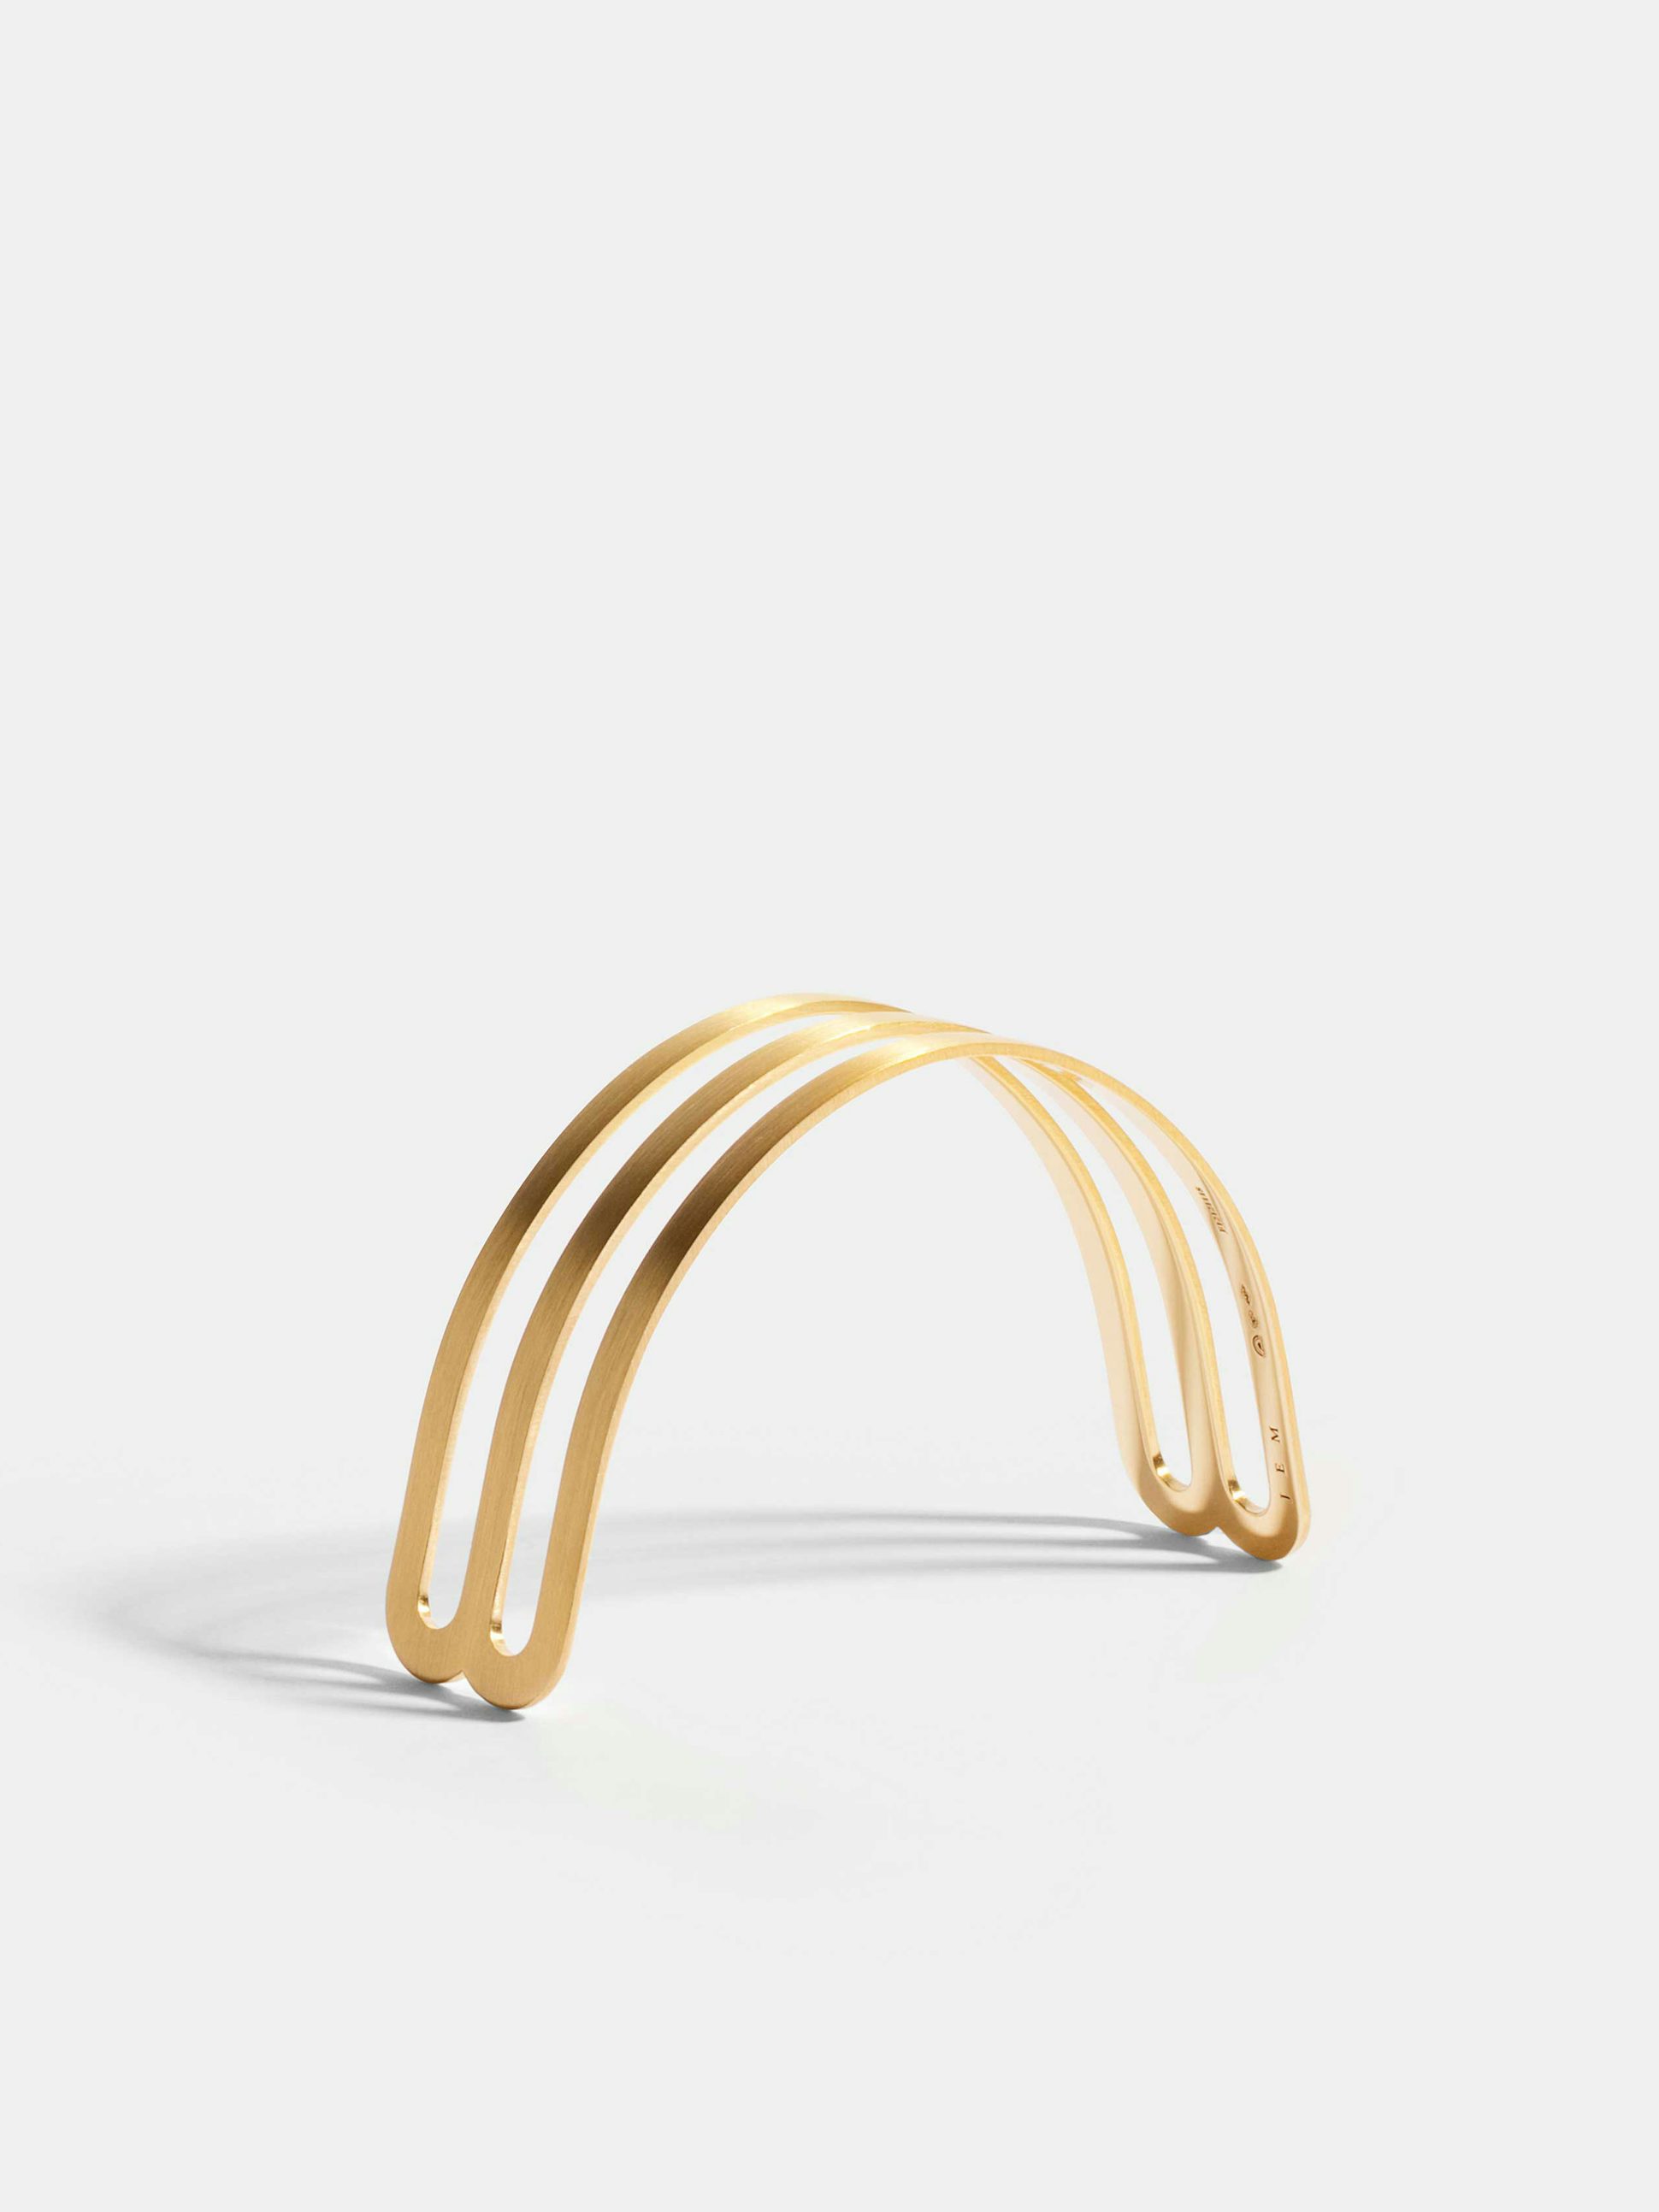 Étreintes double half-bracelet in 18k Fairmined ethical yellow gold with a brushed finish.